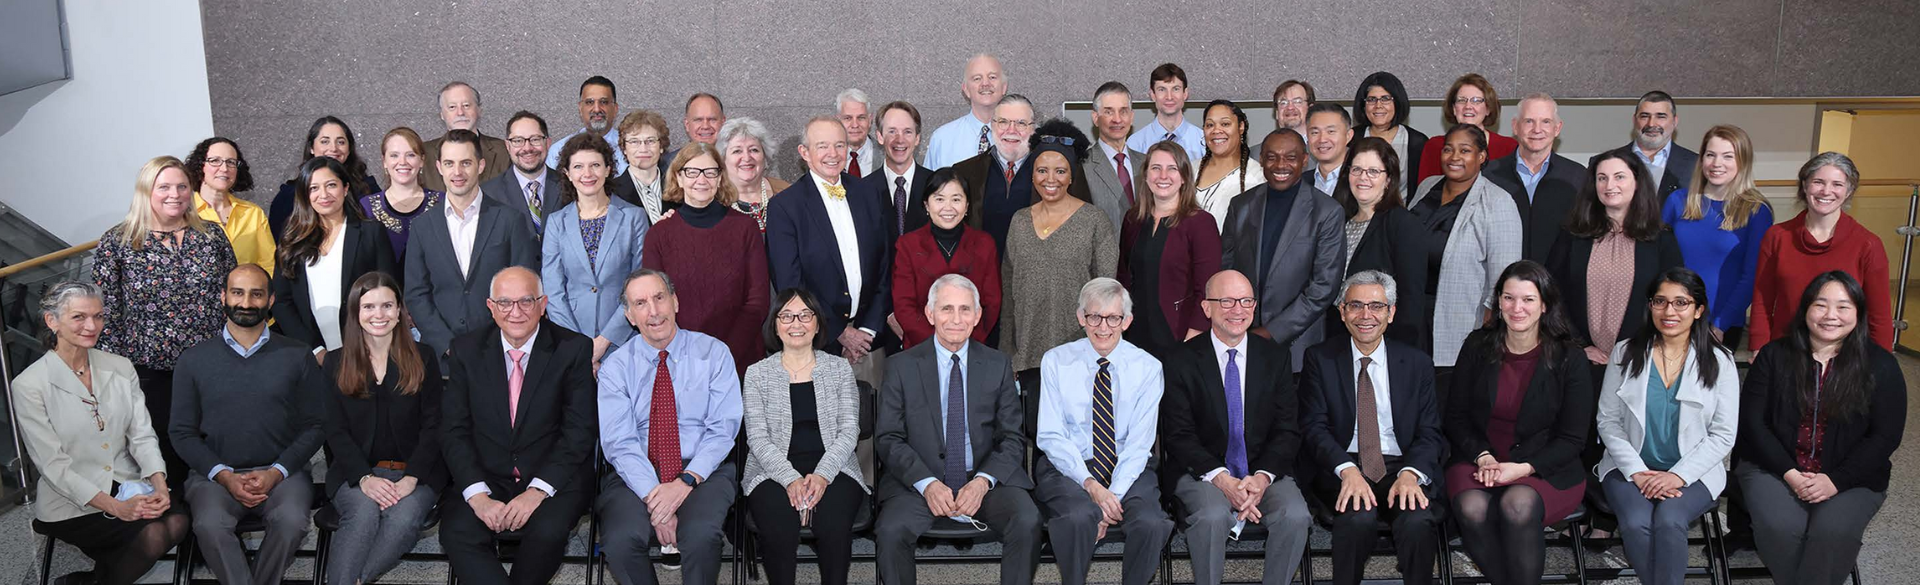 Members of the National Institutes of Health COVID-19 Treatment Guidelines Panel.